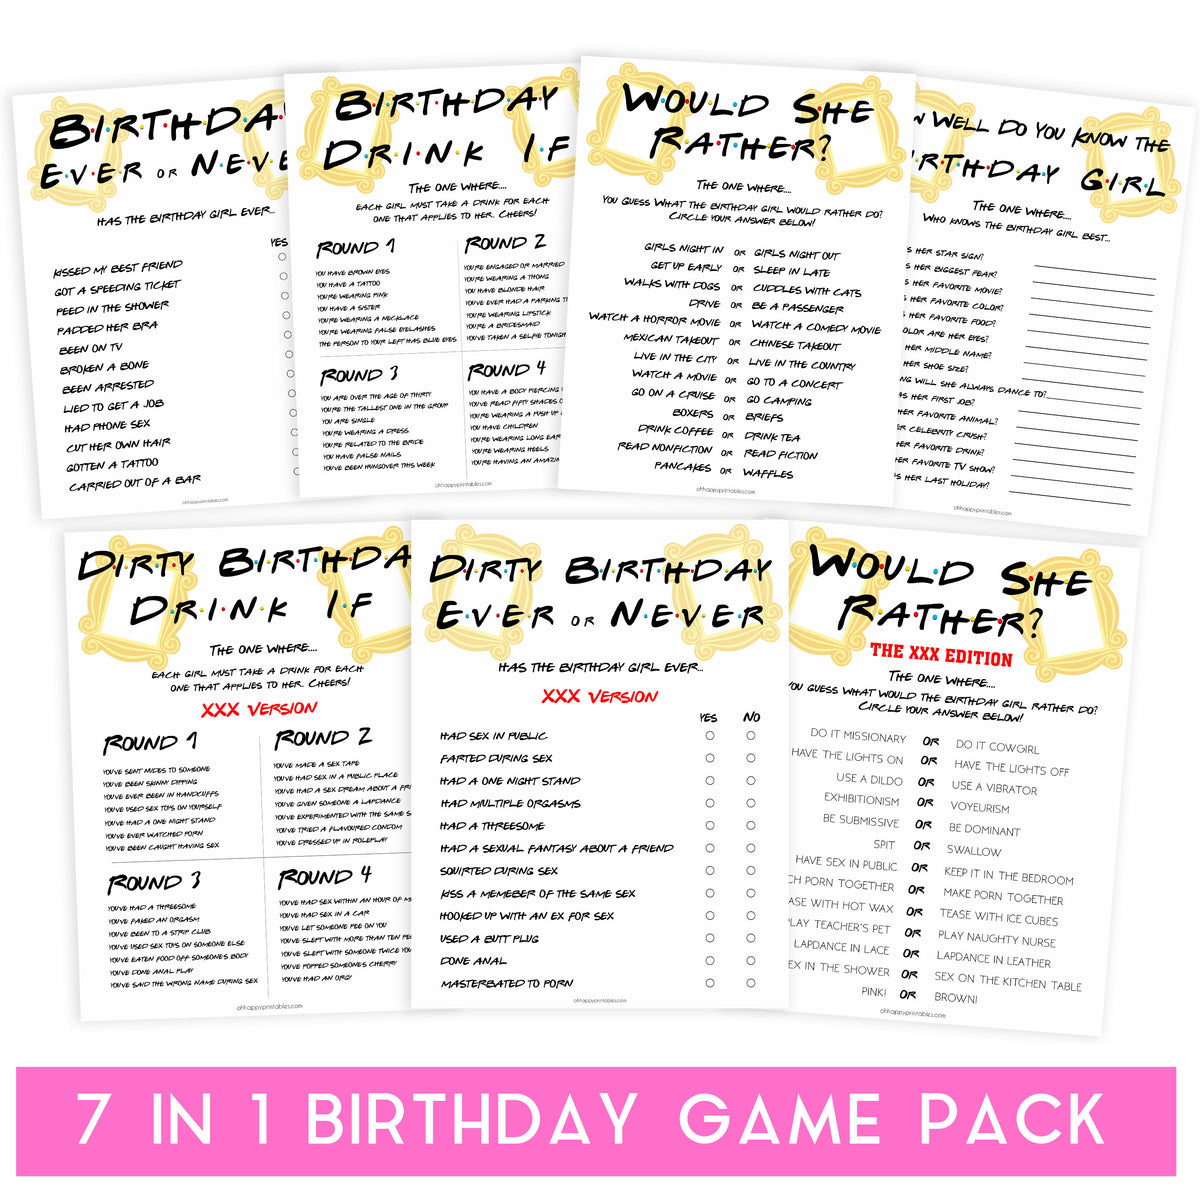 7 birthday games, would she rather birthday games, friends birthday games, fun birthday games, birthday drink if game